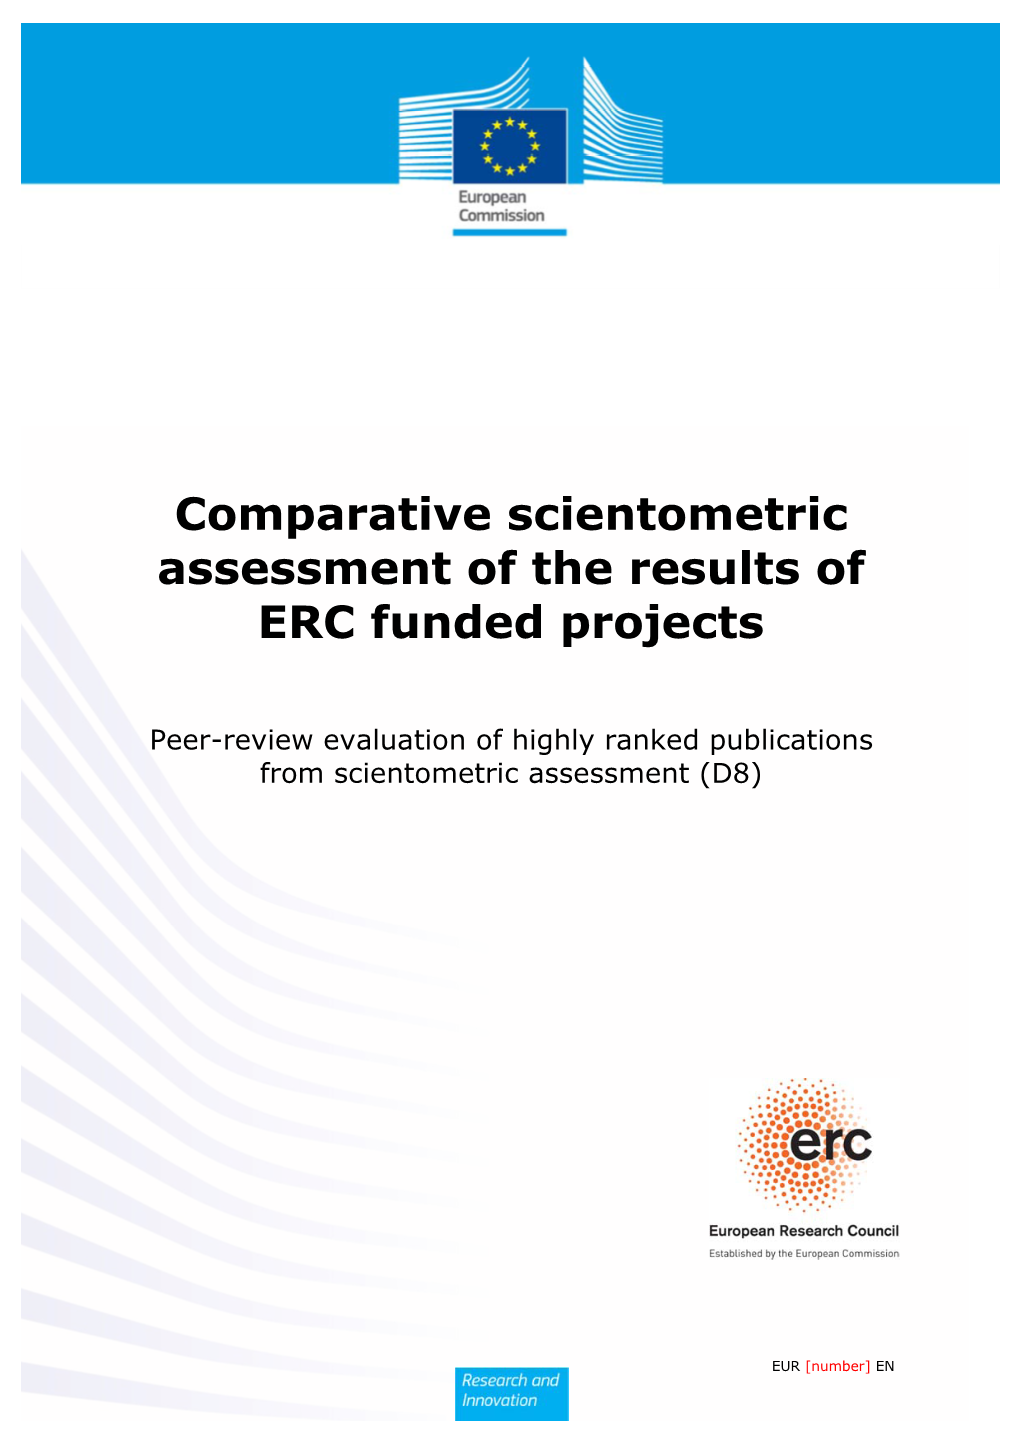 Comparative Scientometric Assessment of the Results of ERC Funded Projects